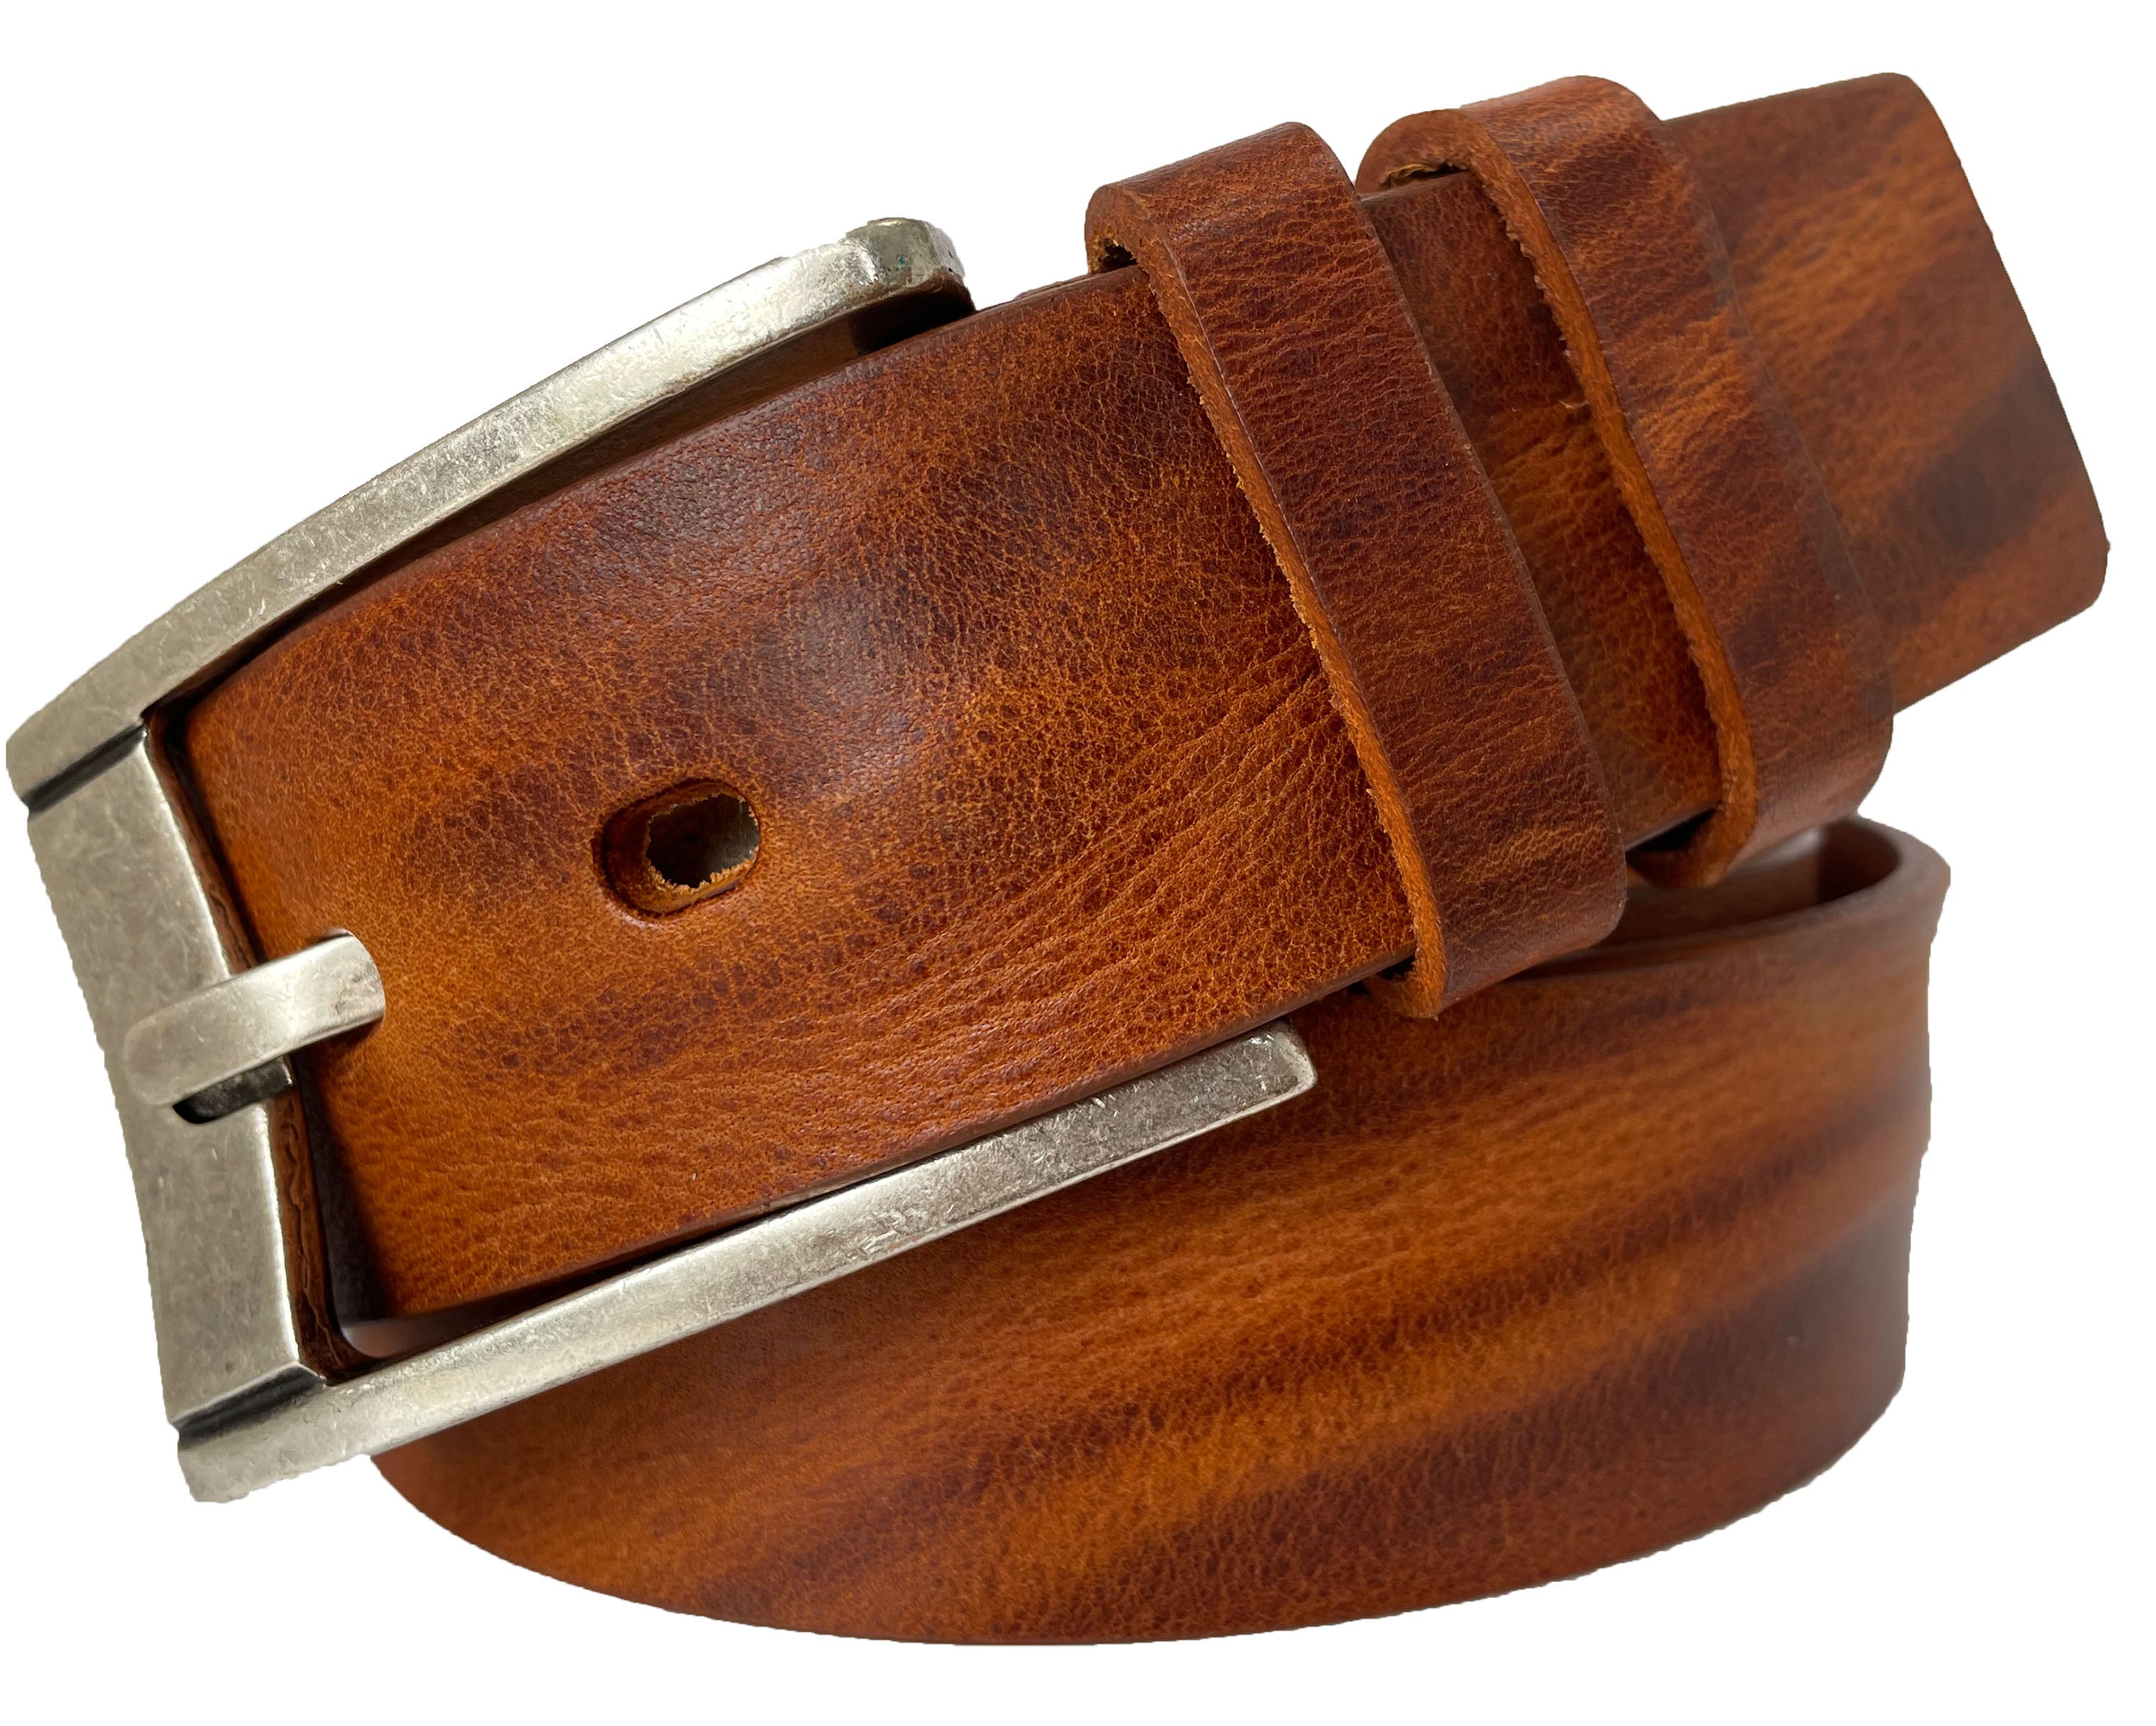 TAN TWO TONE STONEWASHED  40MM HIDE LEATHER BELT